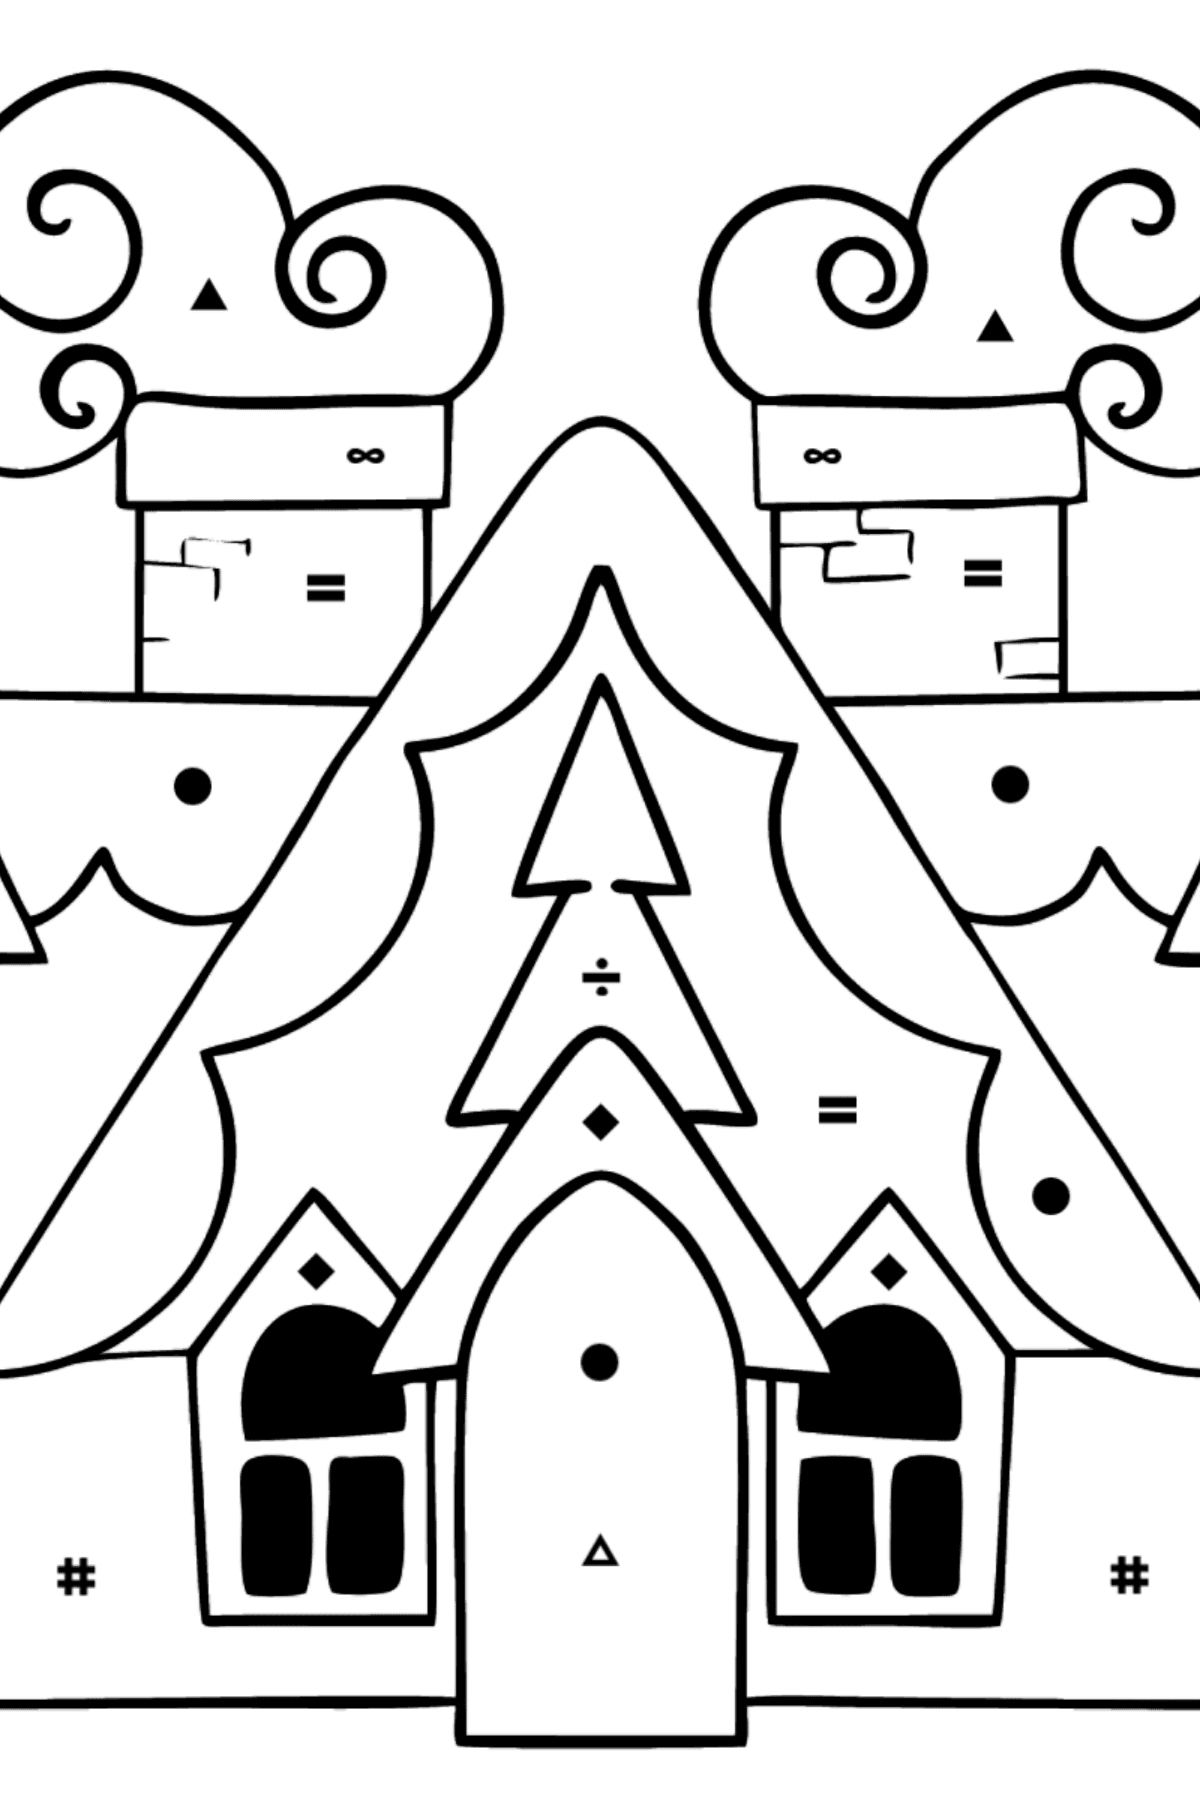 Complex Coloring Page - A Magic House - Coloring by Symbols for Kids